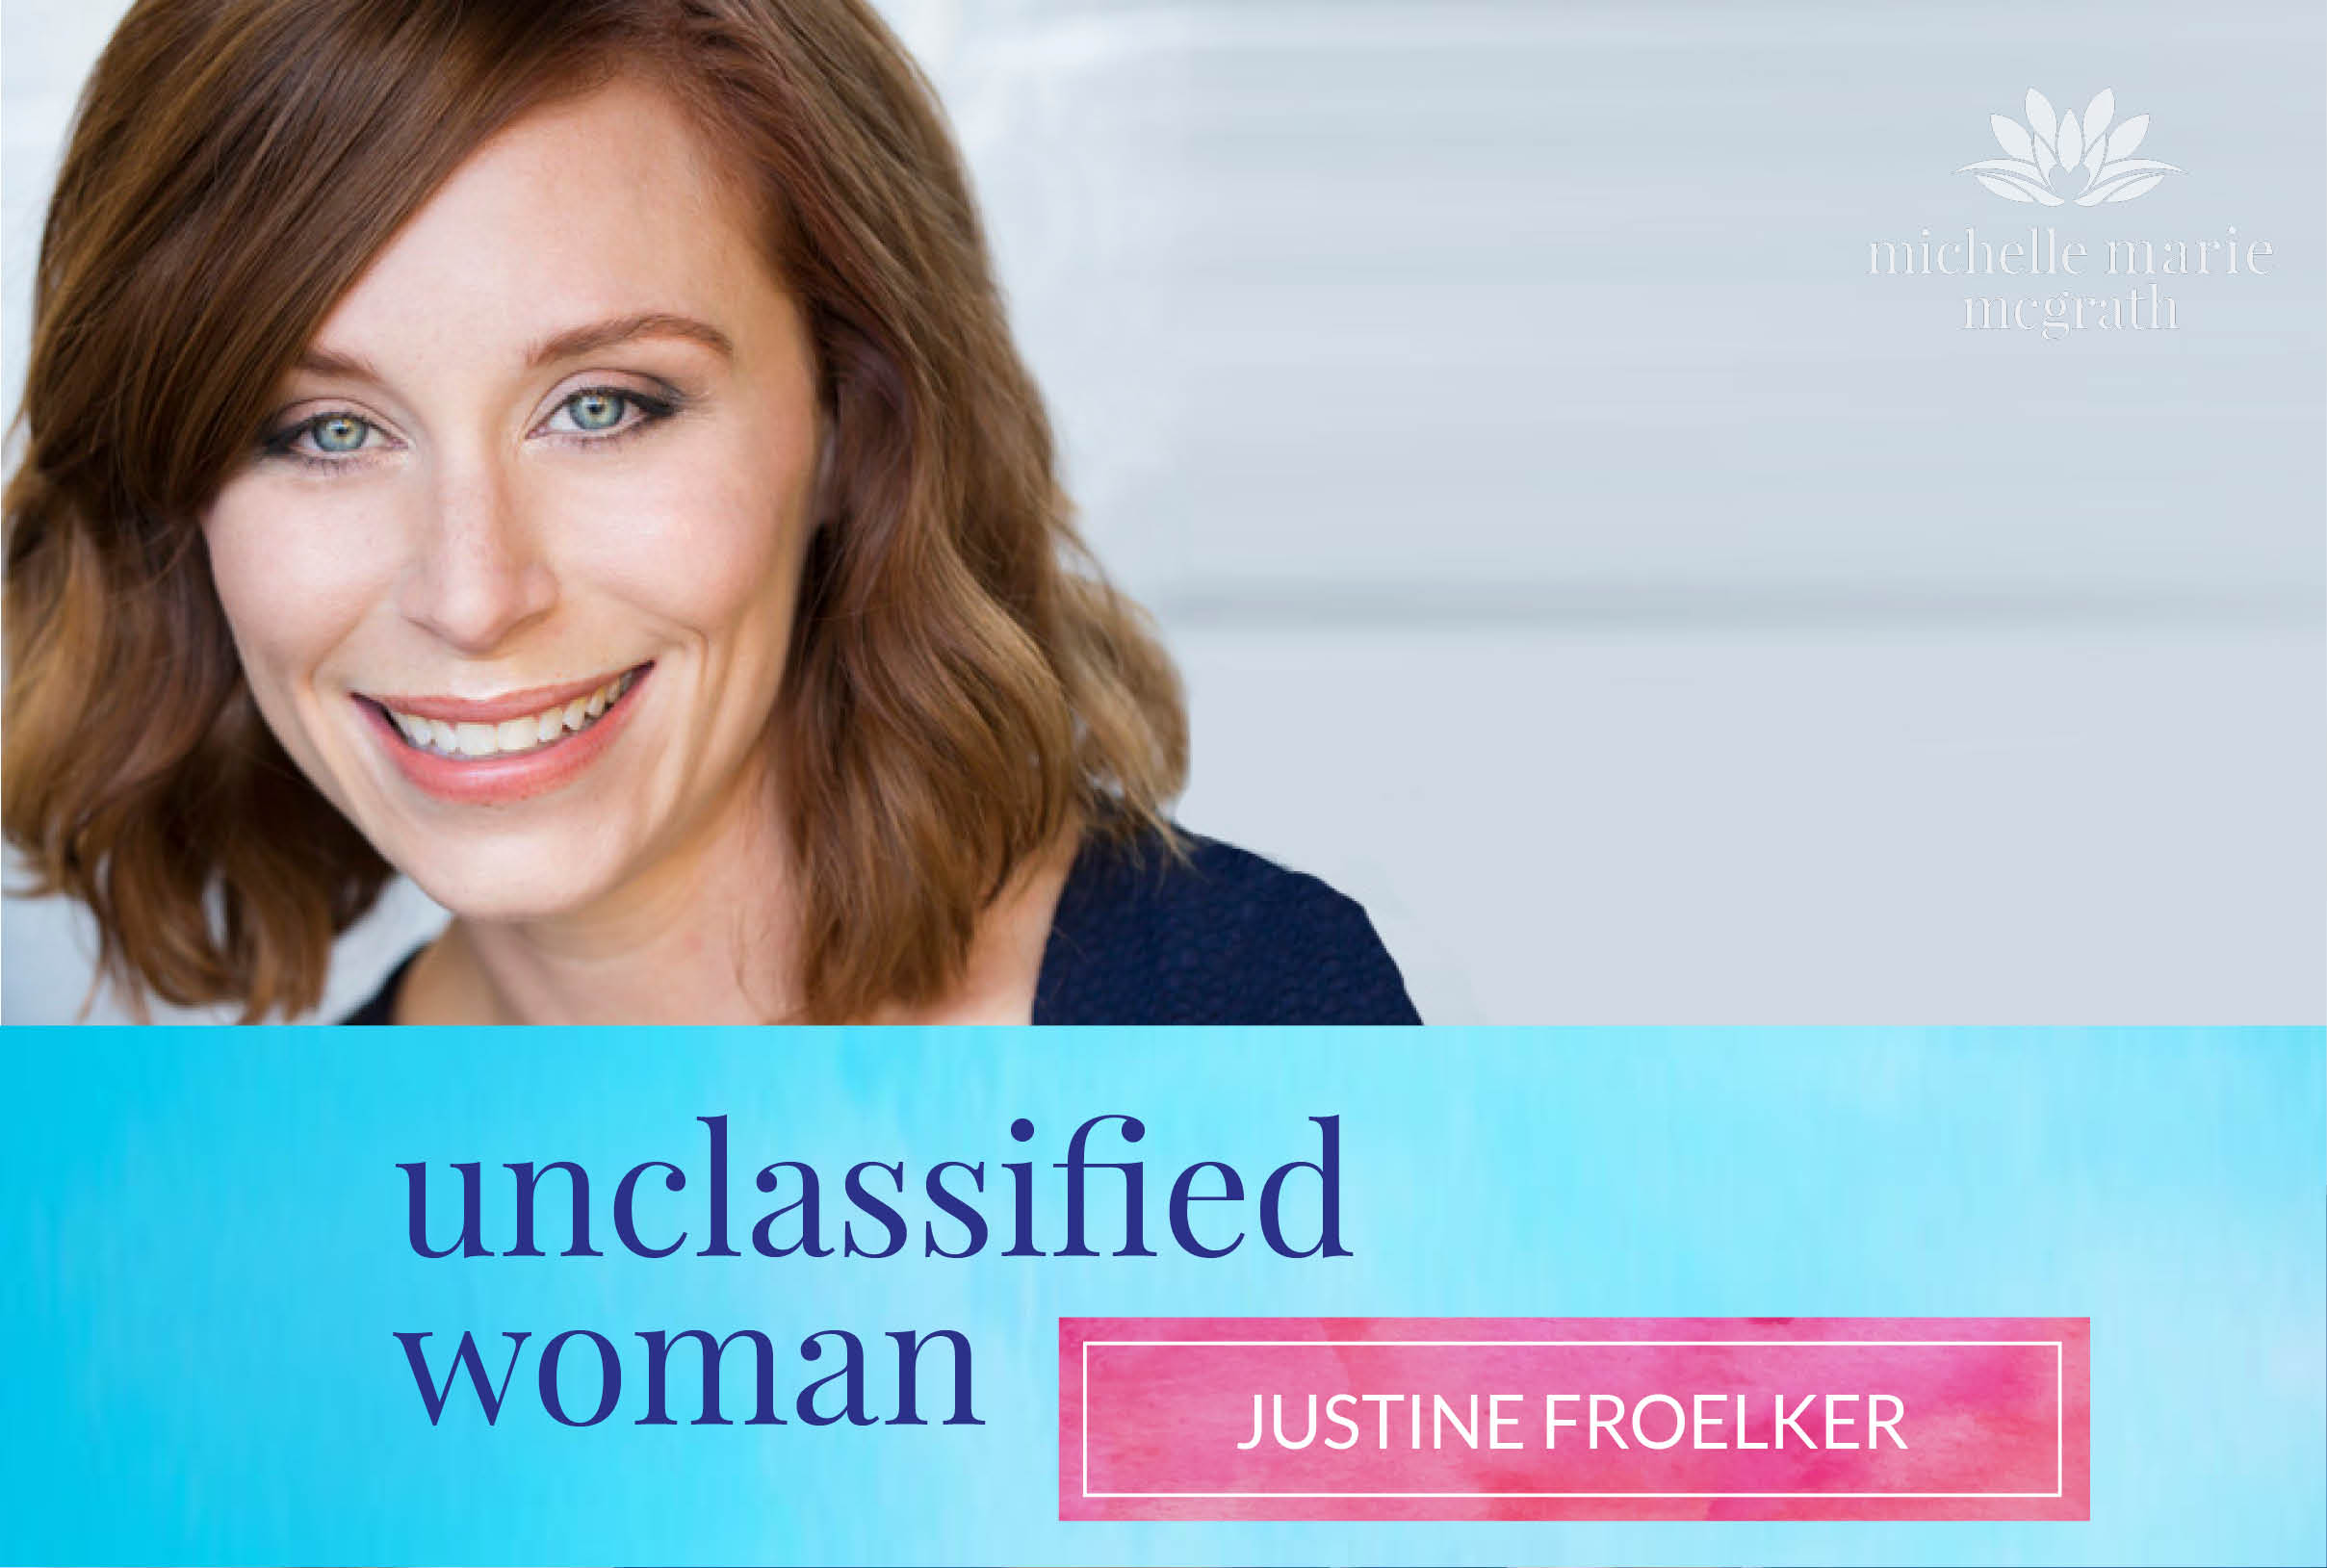 12: Justine Froelker Continues Ever Upward